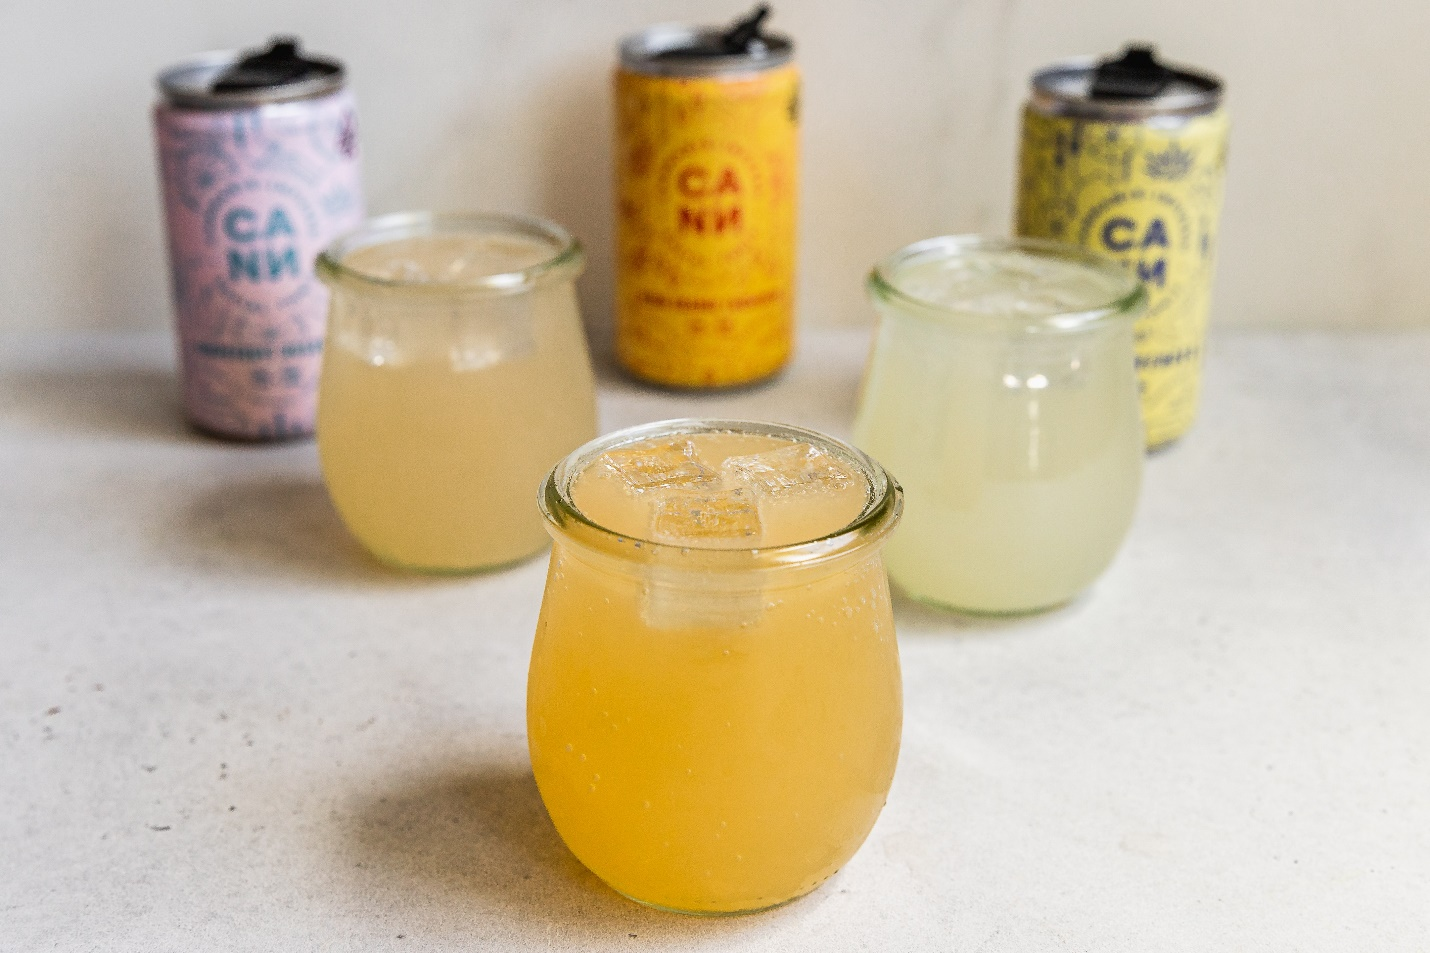 Three glasses with drinks in orange, yellow, and white sit in front of opened cans on a countertop